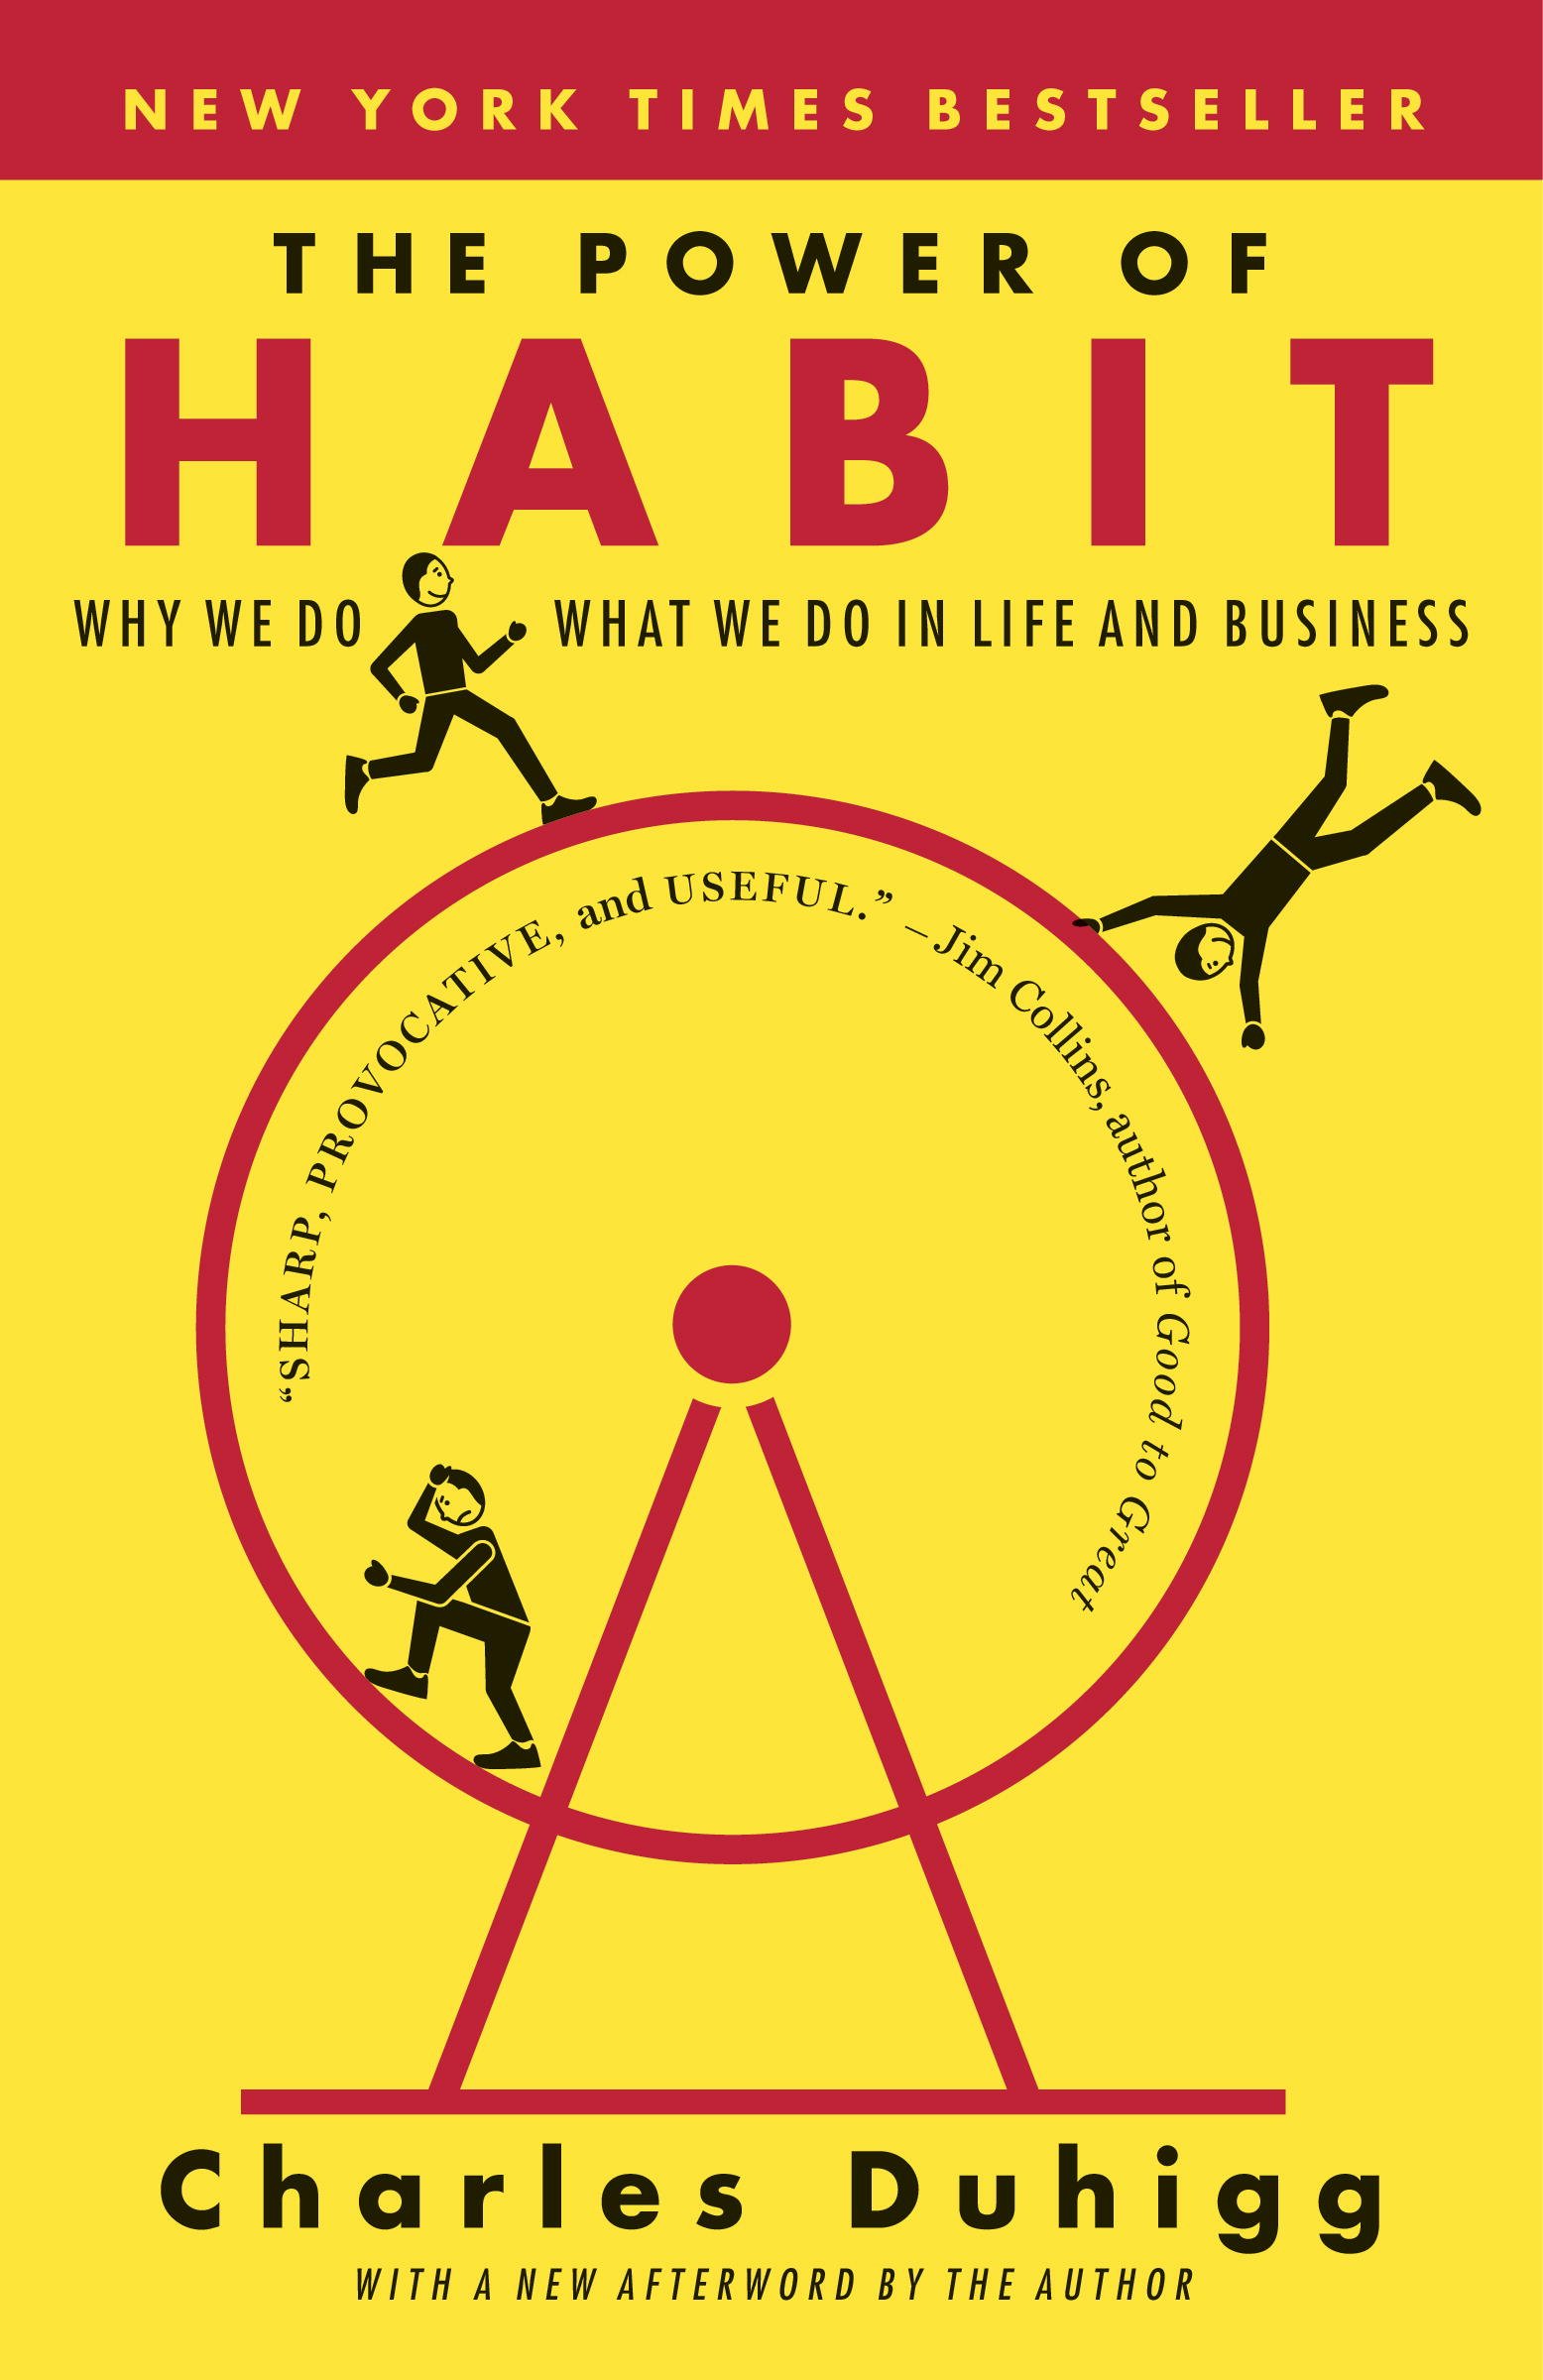 The Power of Habit: Why We Do What We Do in Life and Business (Kindle Edition) $2.99